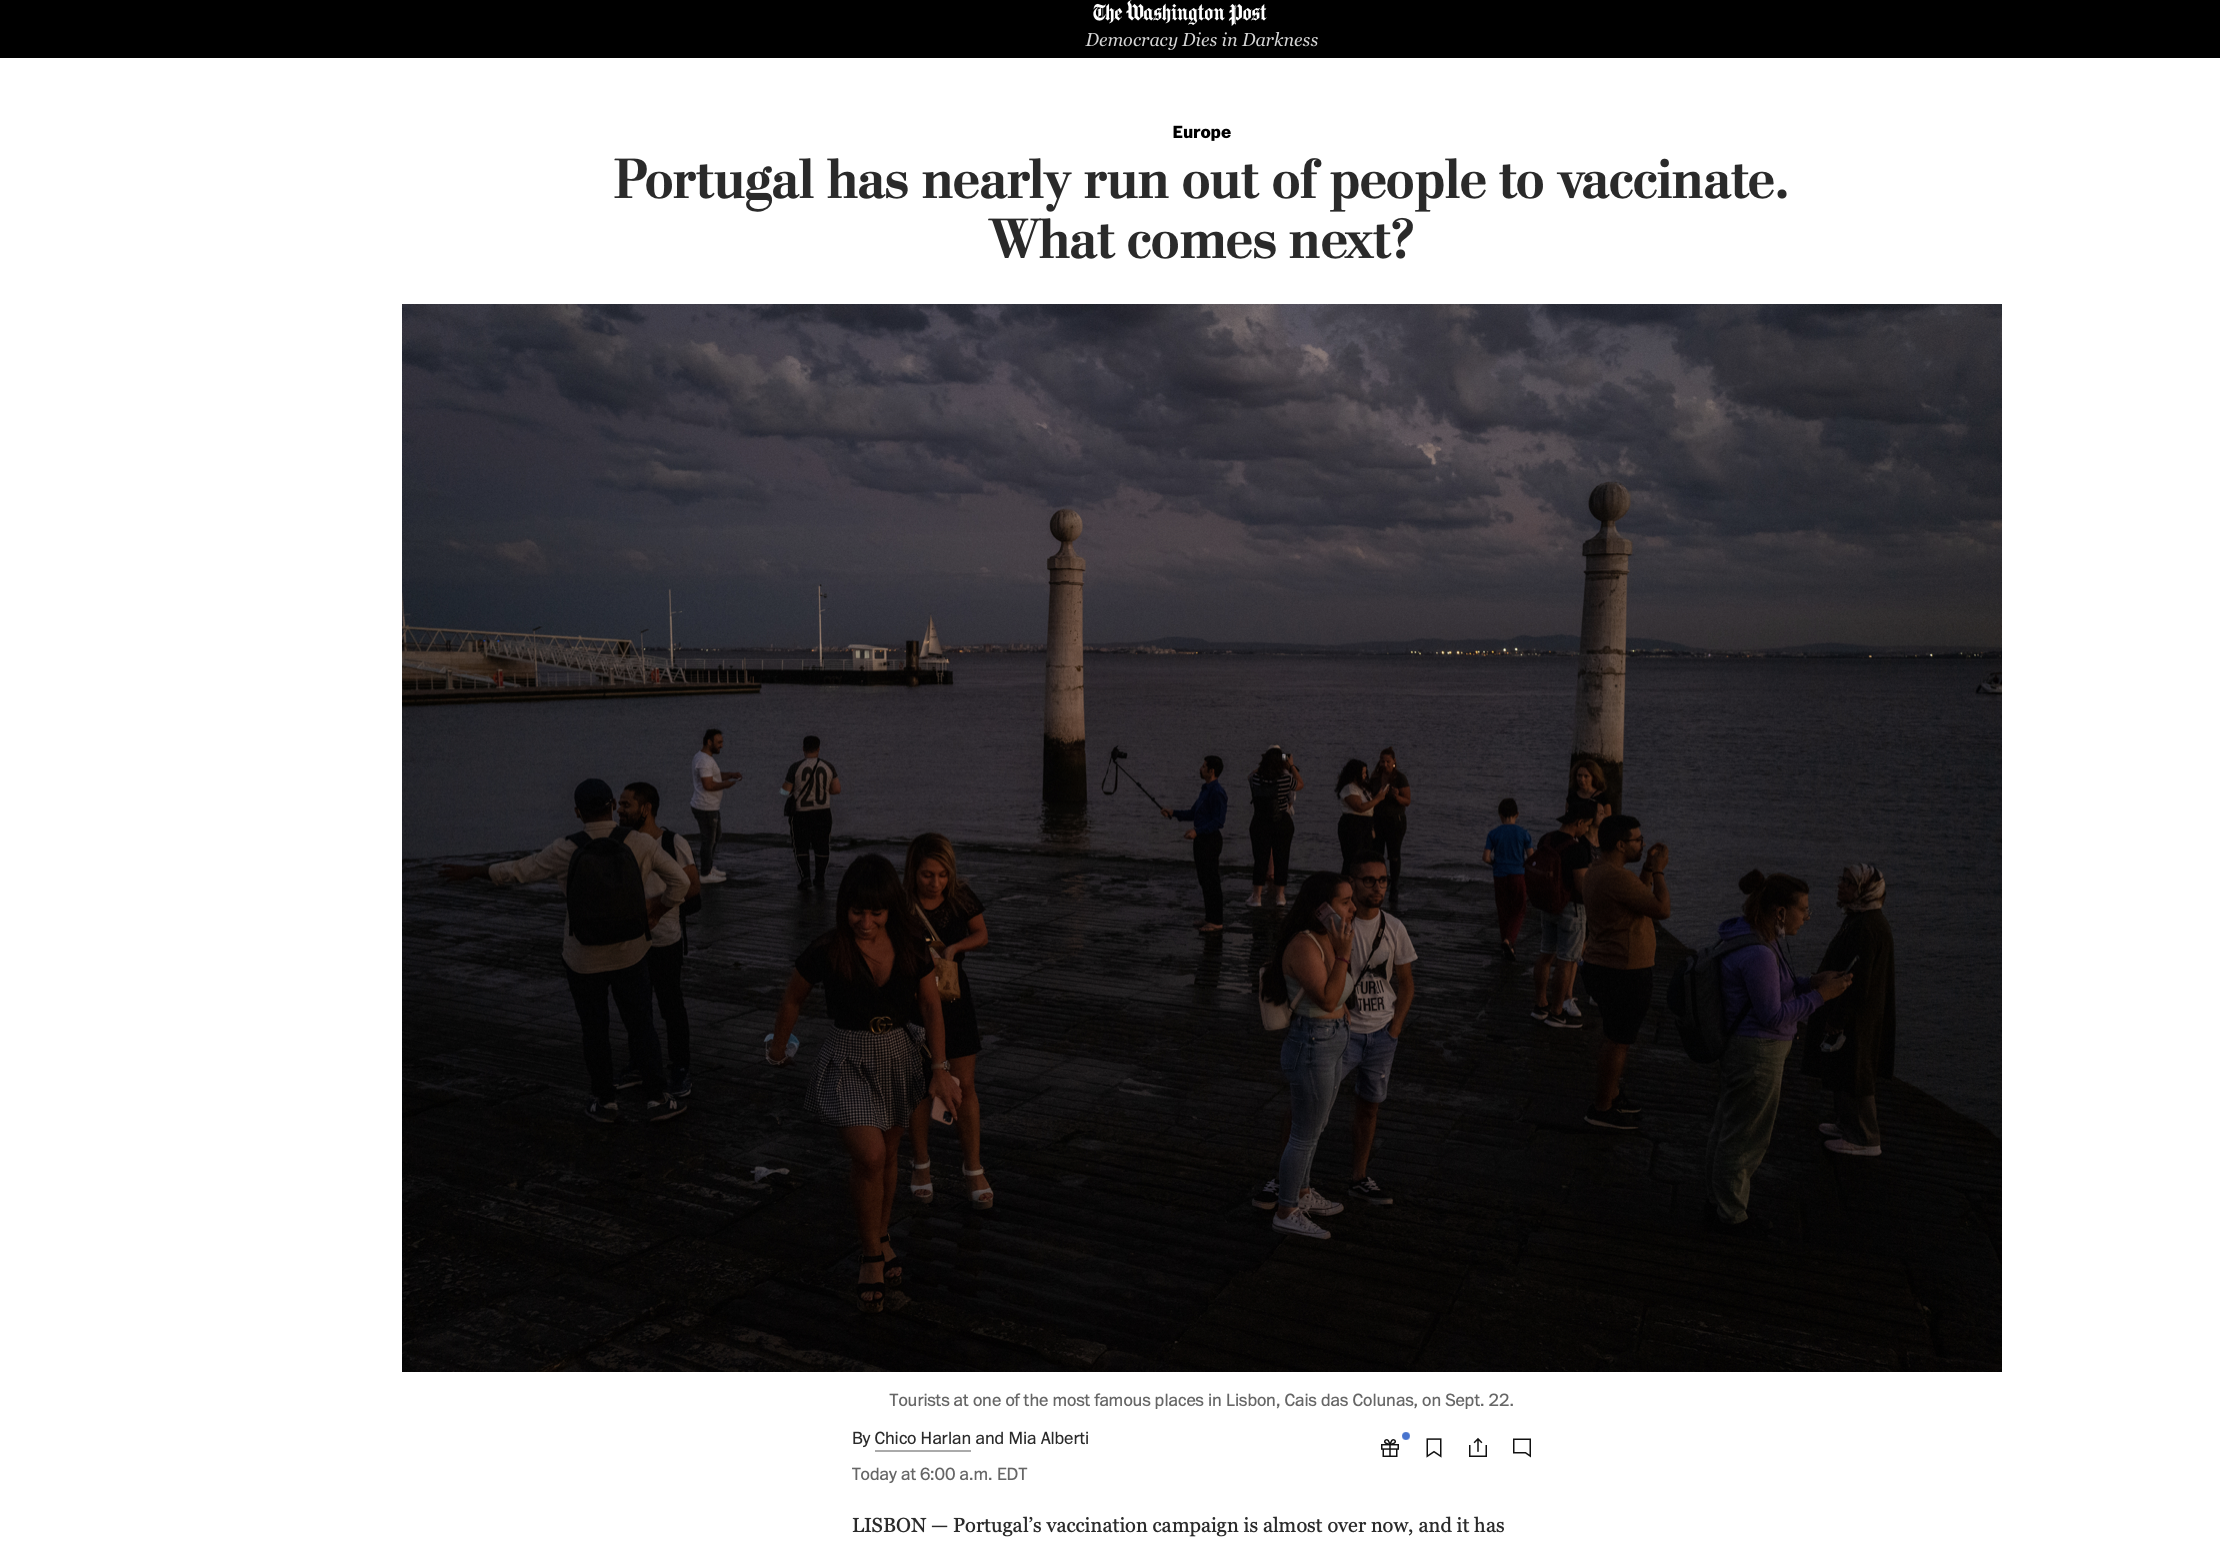 Portugal has nearly run out of people to vaccinate. What comes next?